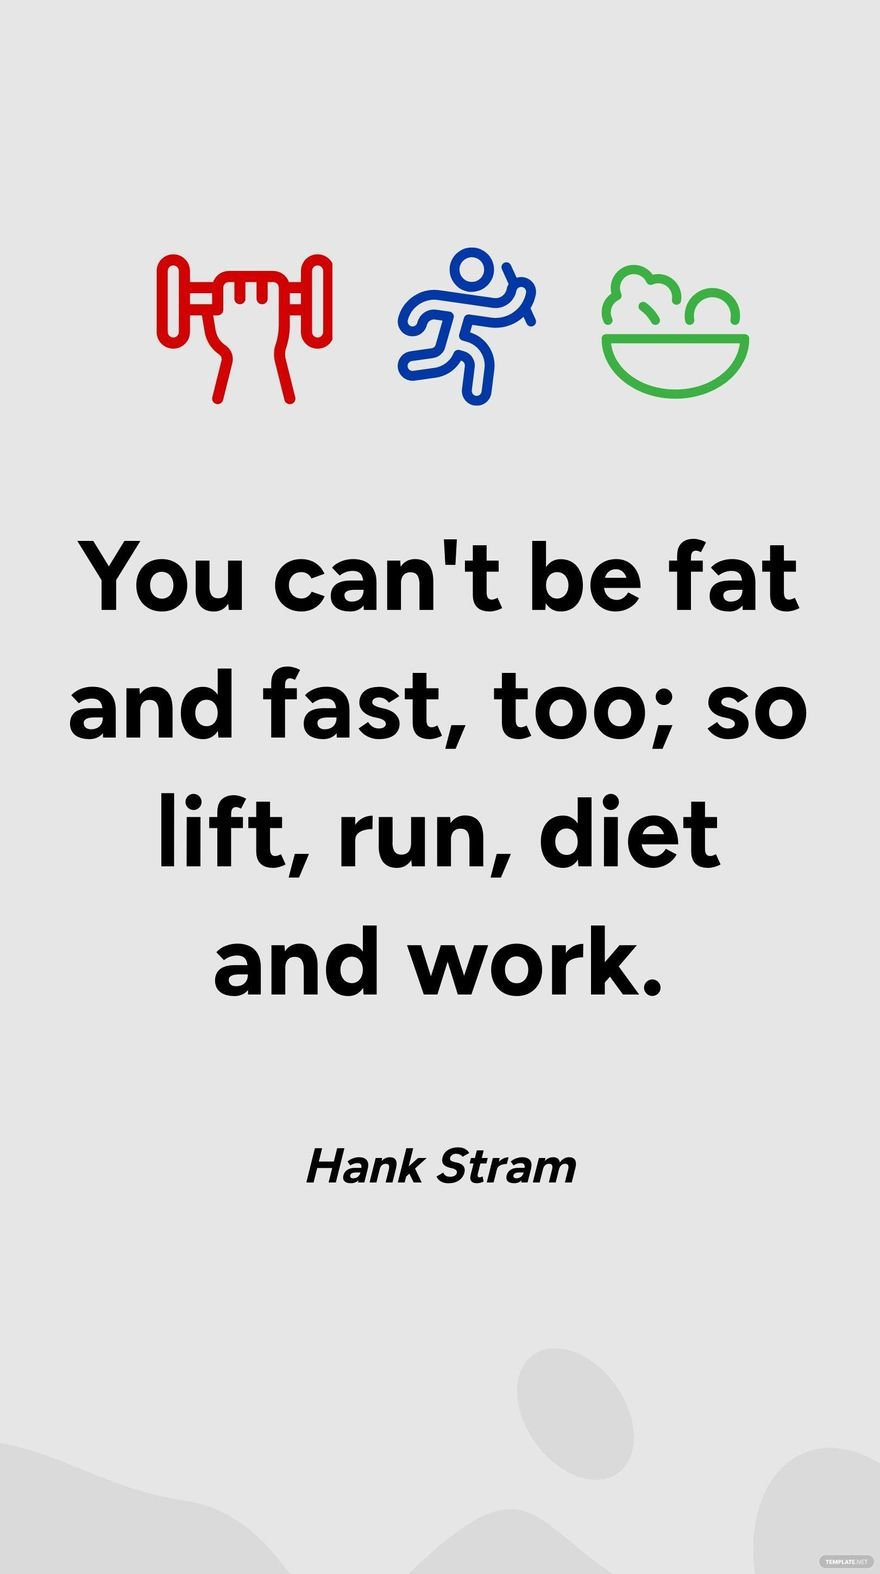 Hank Stram - You can't be fat and fast, too; so lift, run, diet and work. in JPG